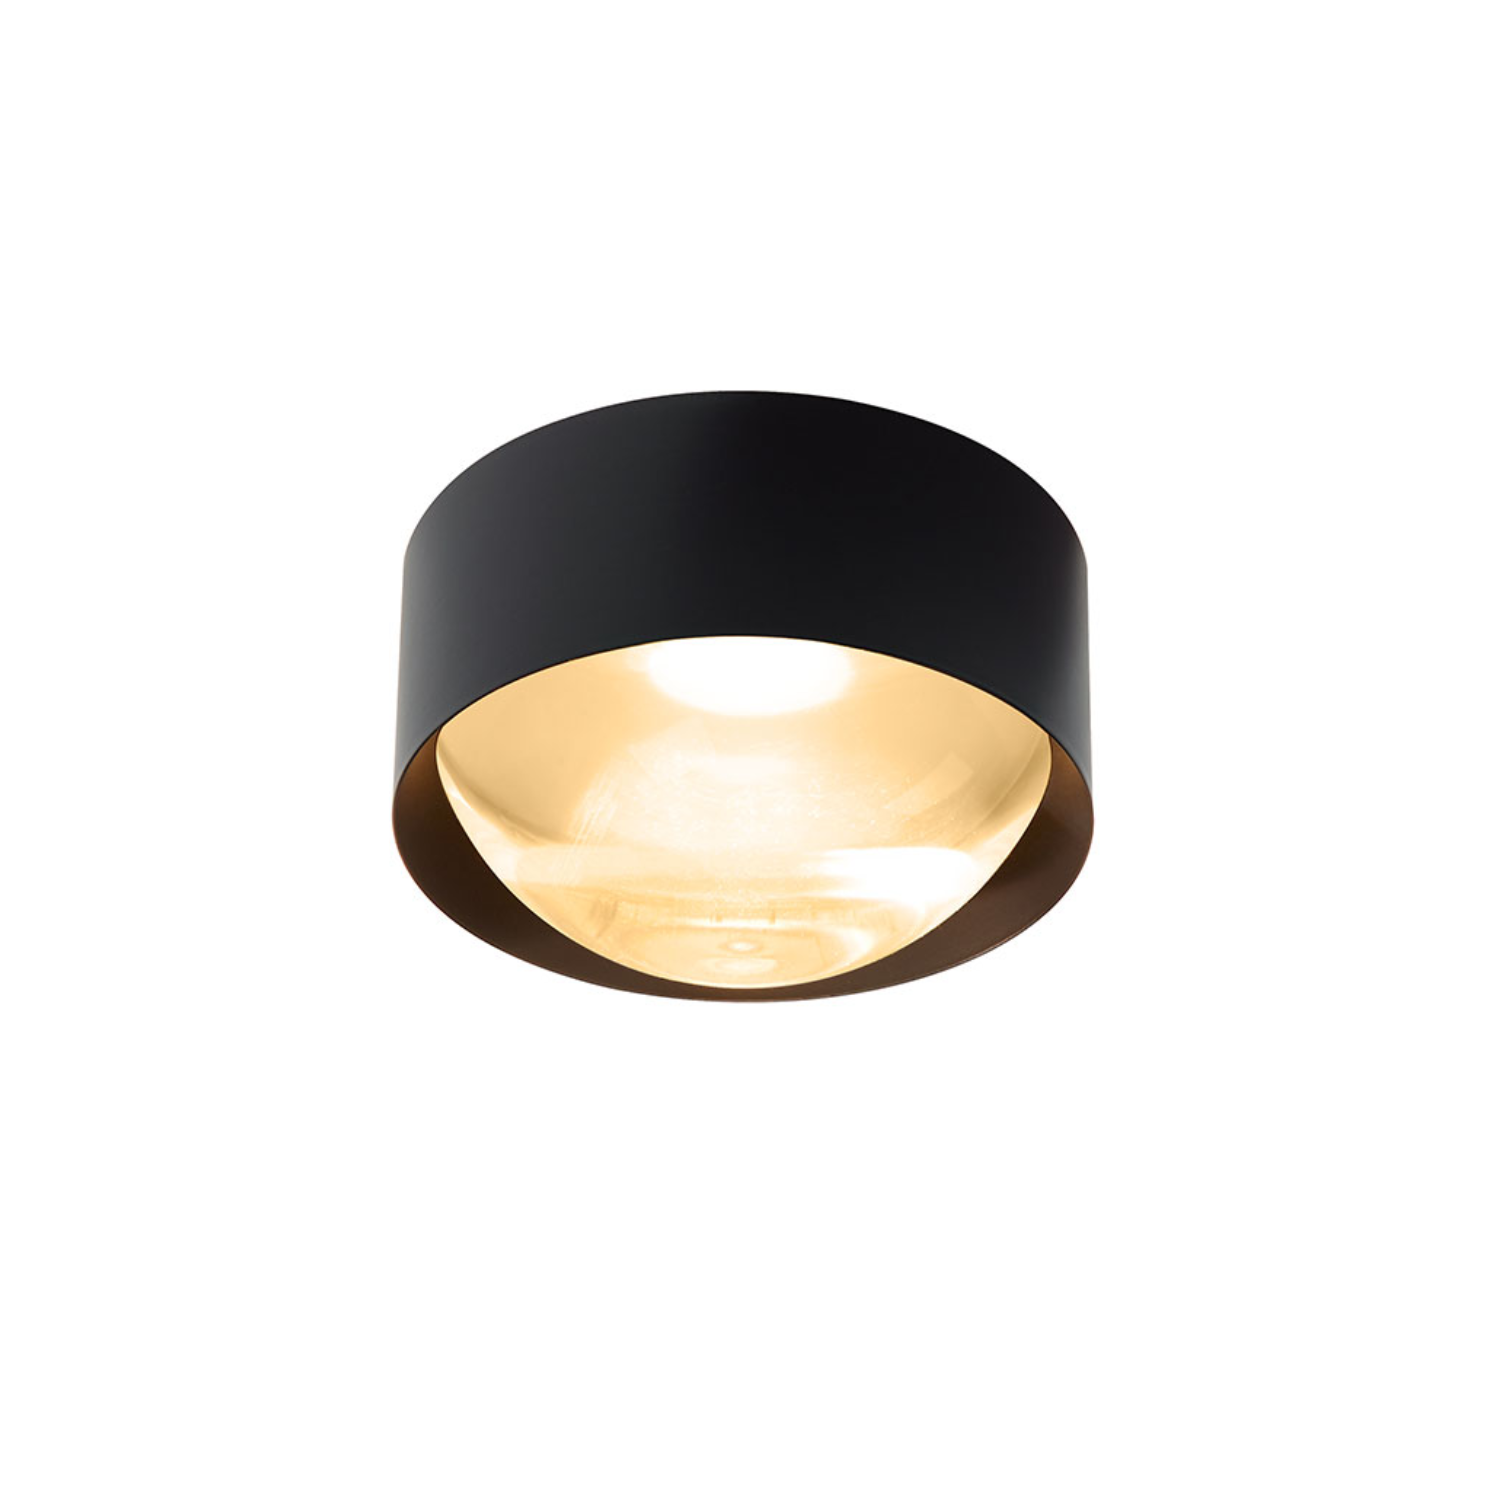 BILY 16 OUT - Ceiling Light